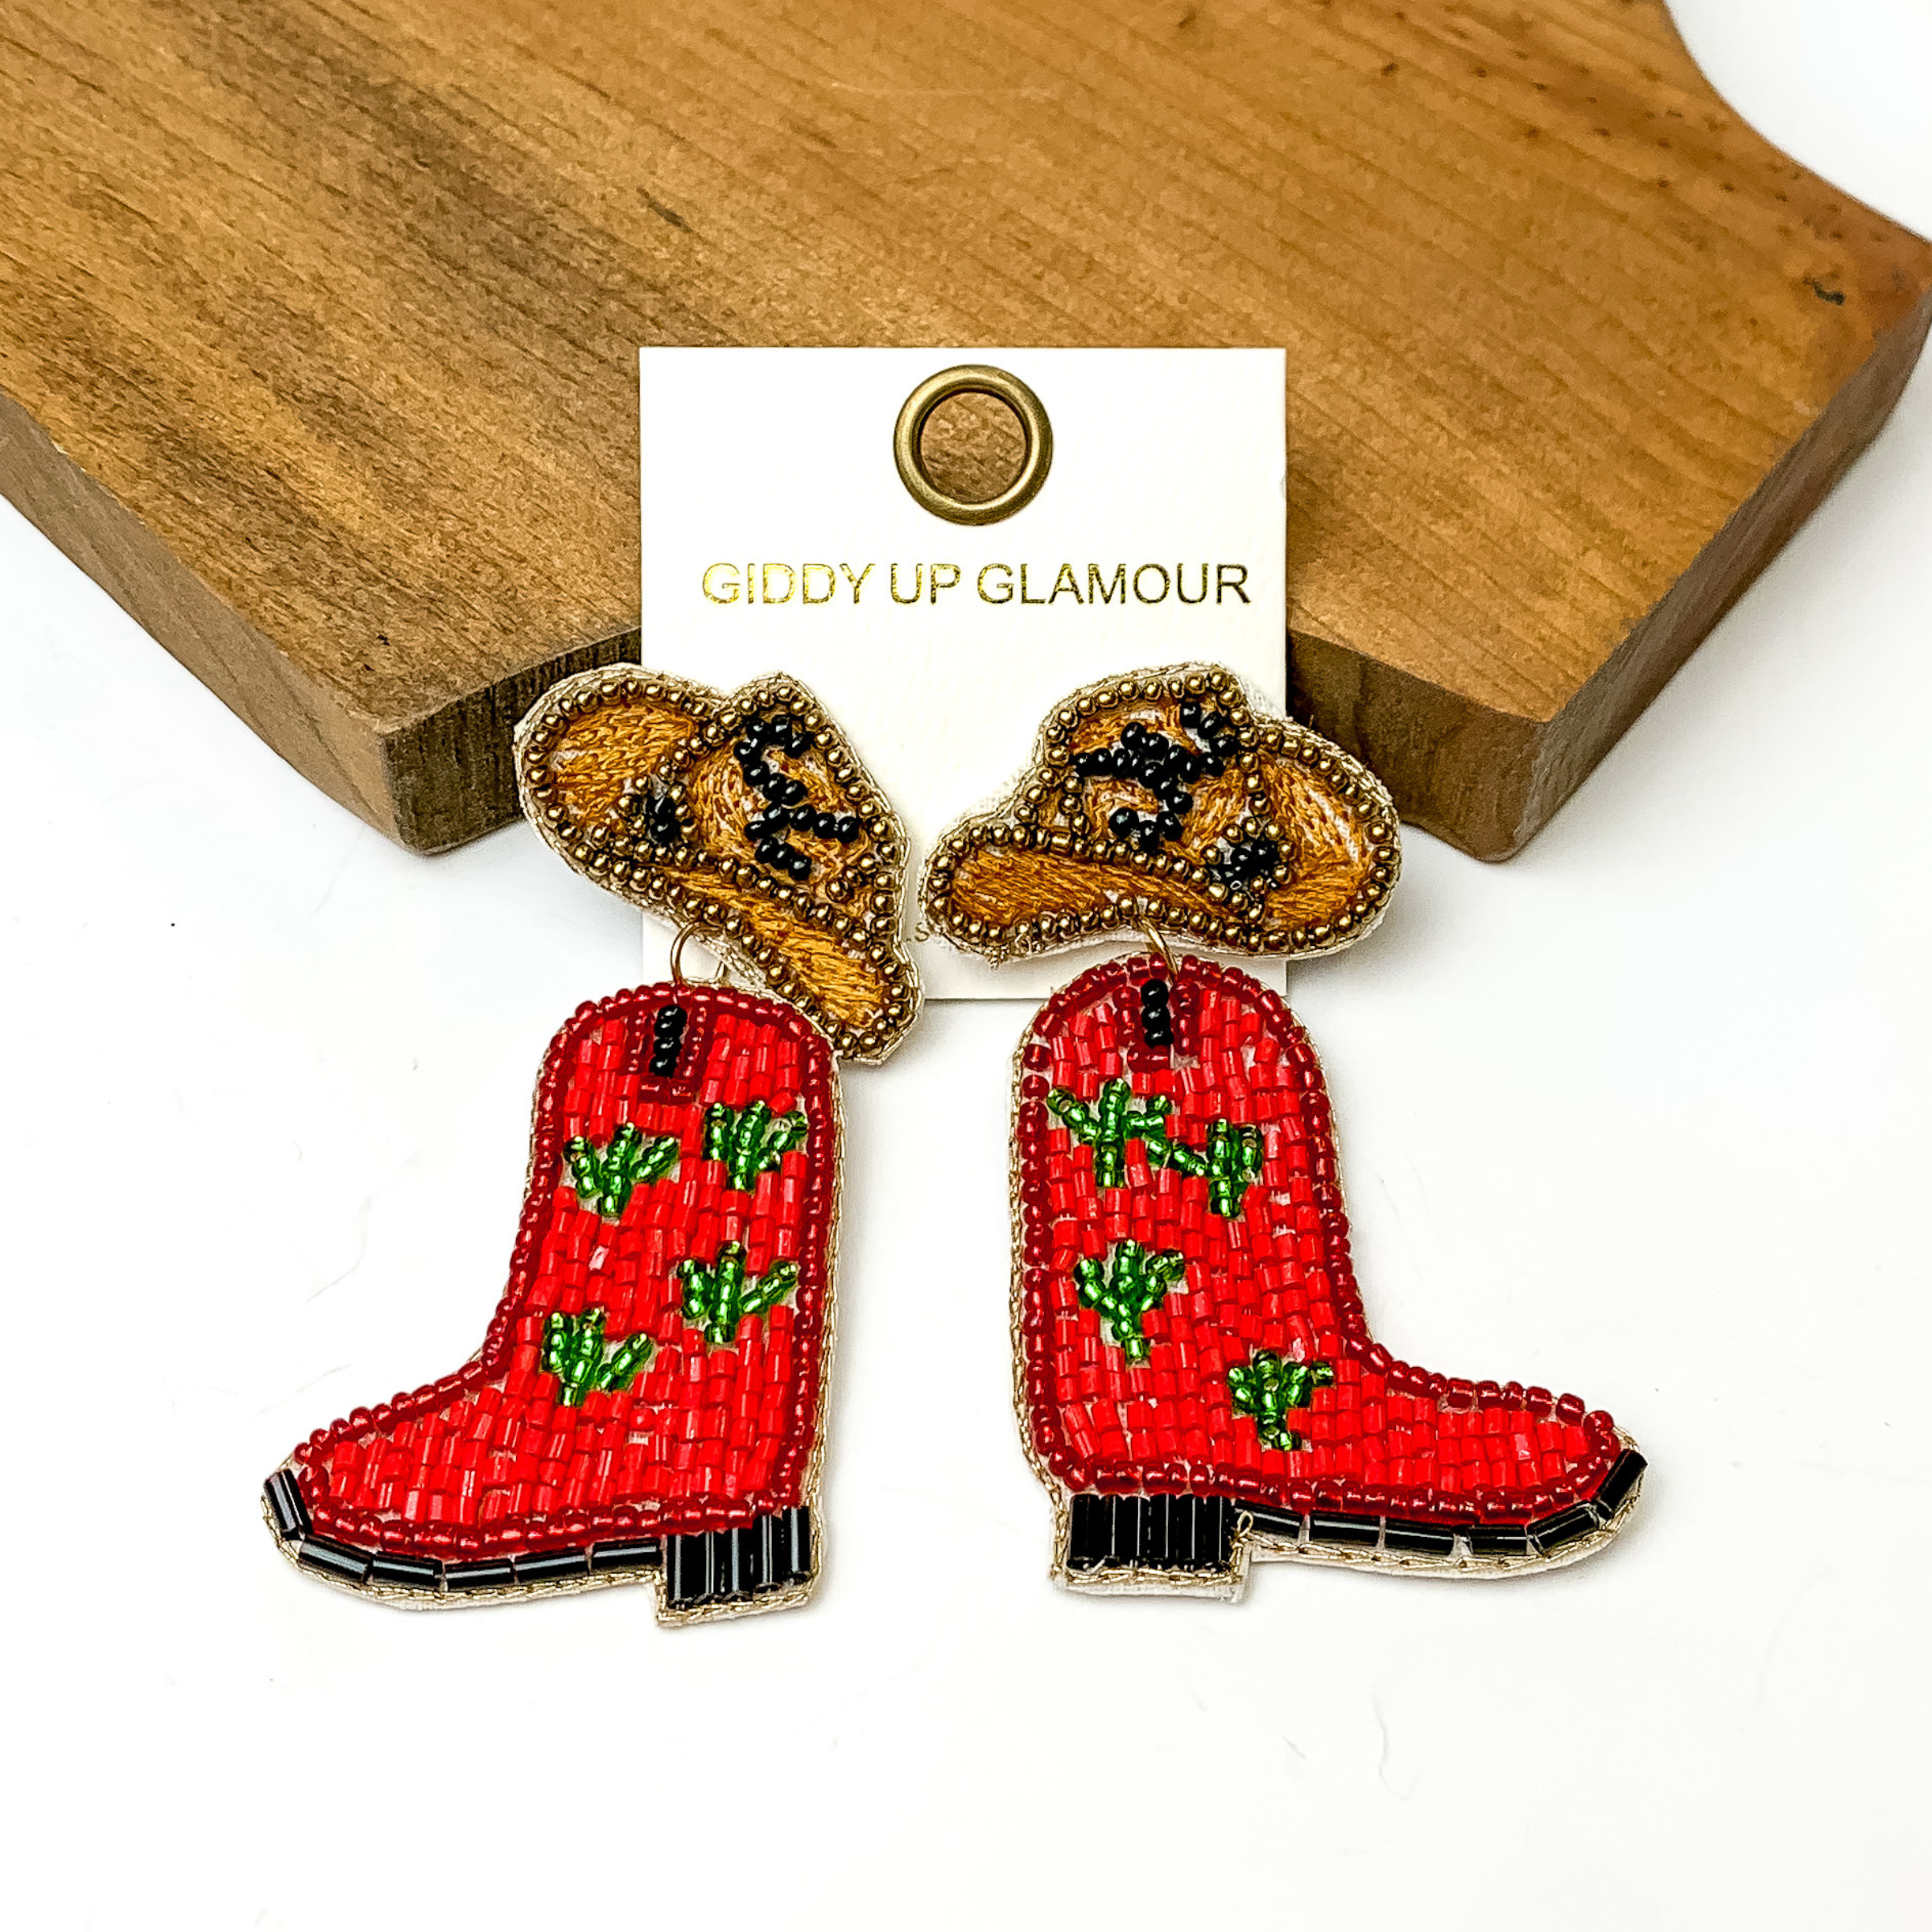 Beaded Cowboy Hat and Boot Earrings in Red - Giddy Up Glamour Boutique